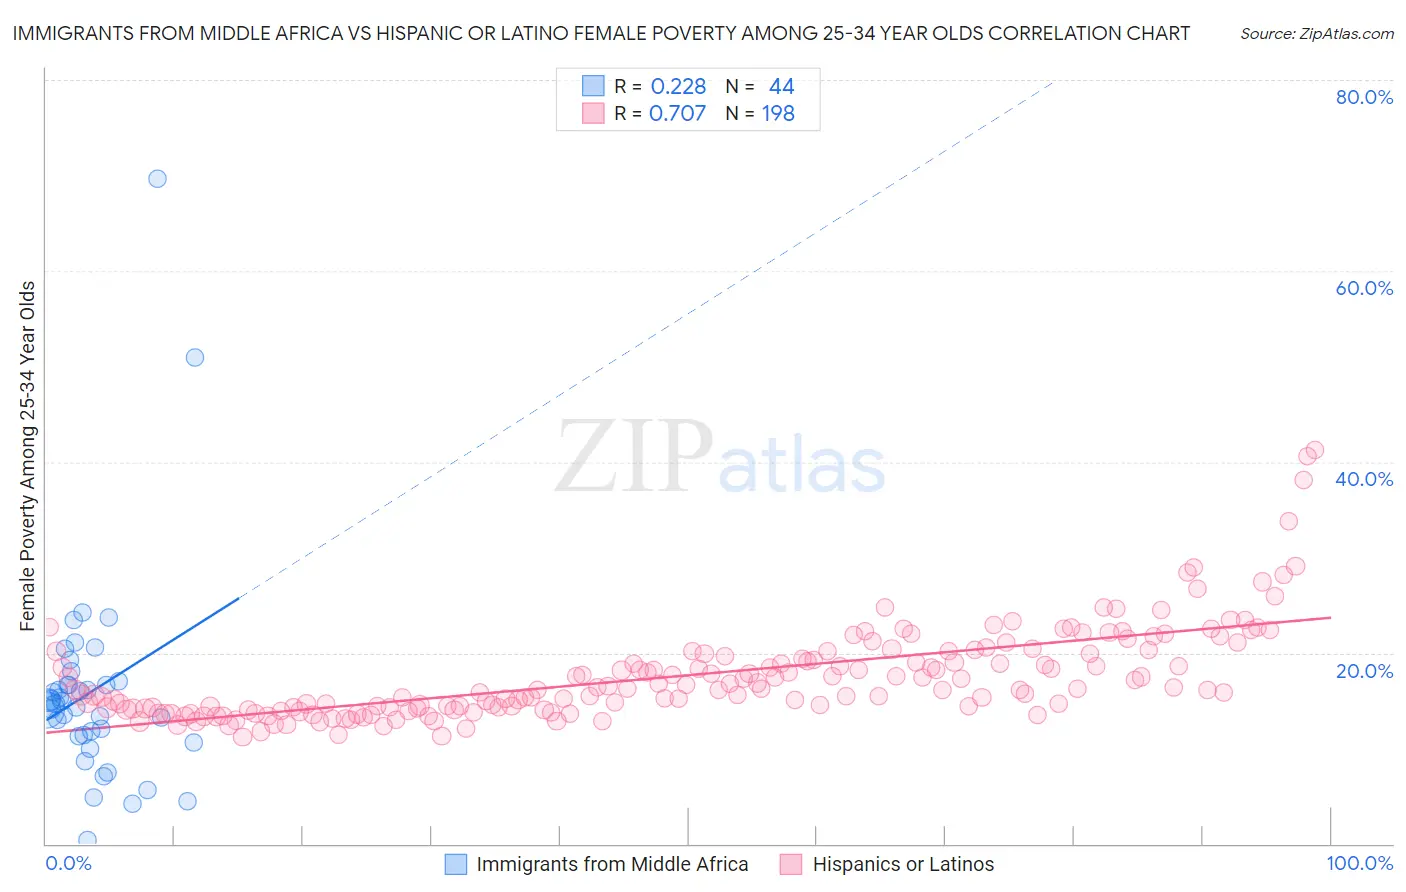 Immigrants from Middle Africa vs Hispanic or Latino Female Poverty Among 25-34 Year Olds